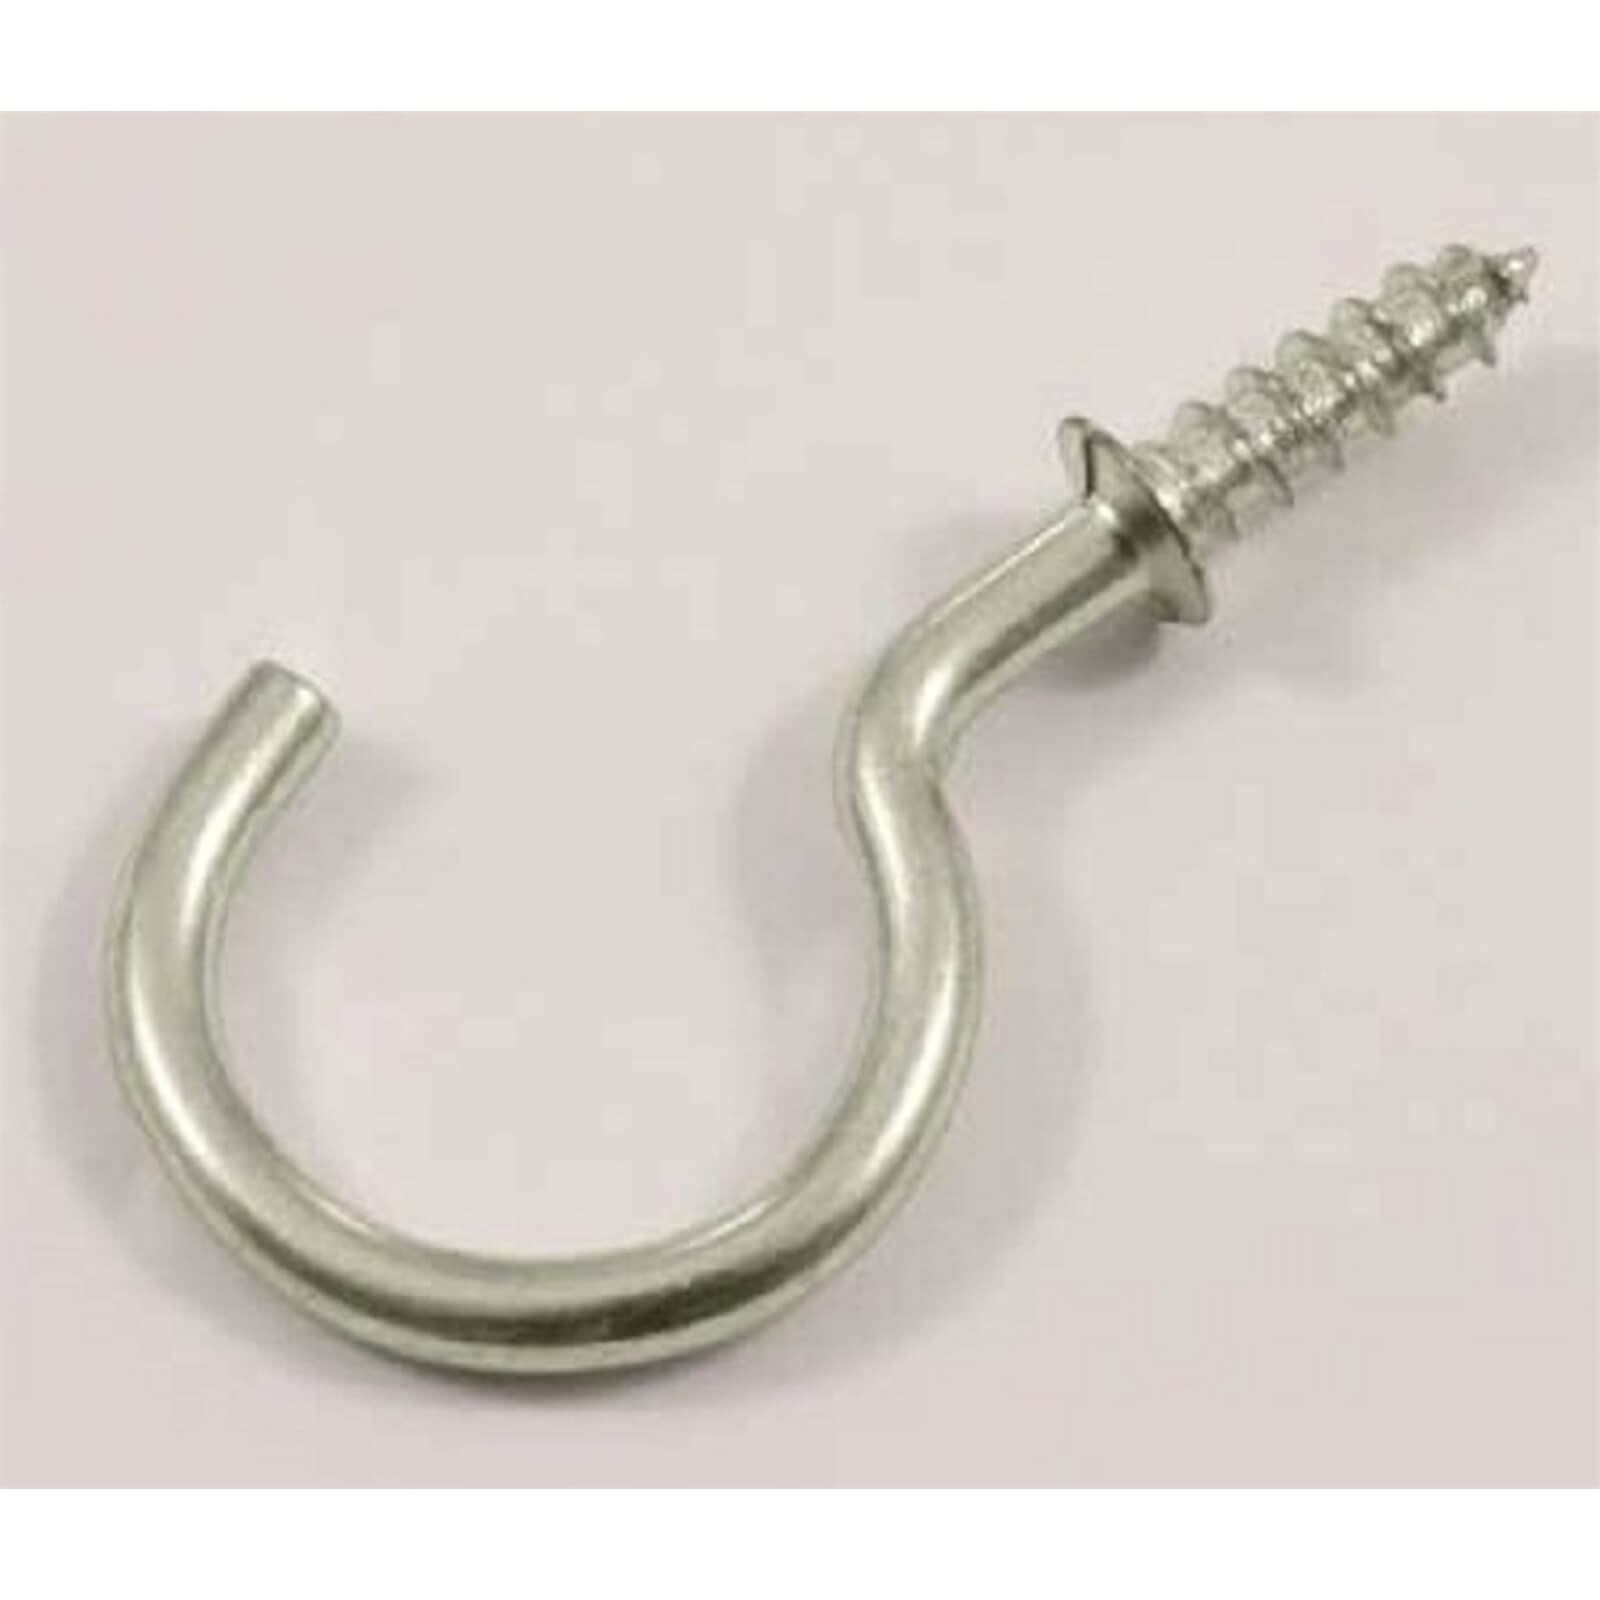 Round Cup Hook - Zinc Plated - 25mm - 4 Pack